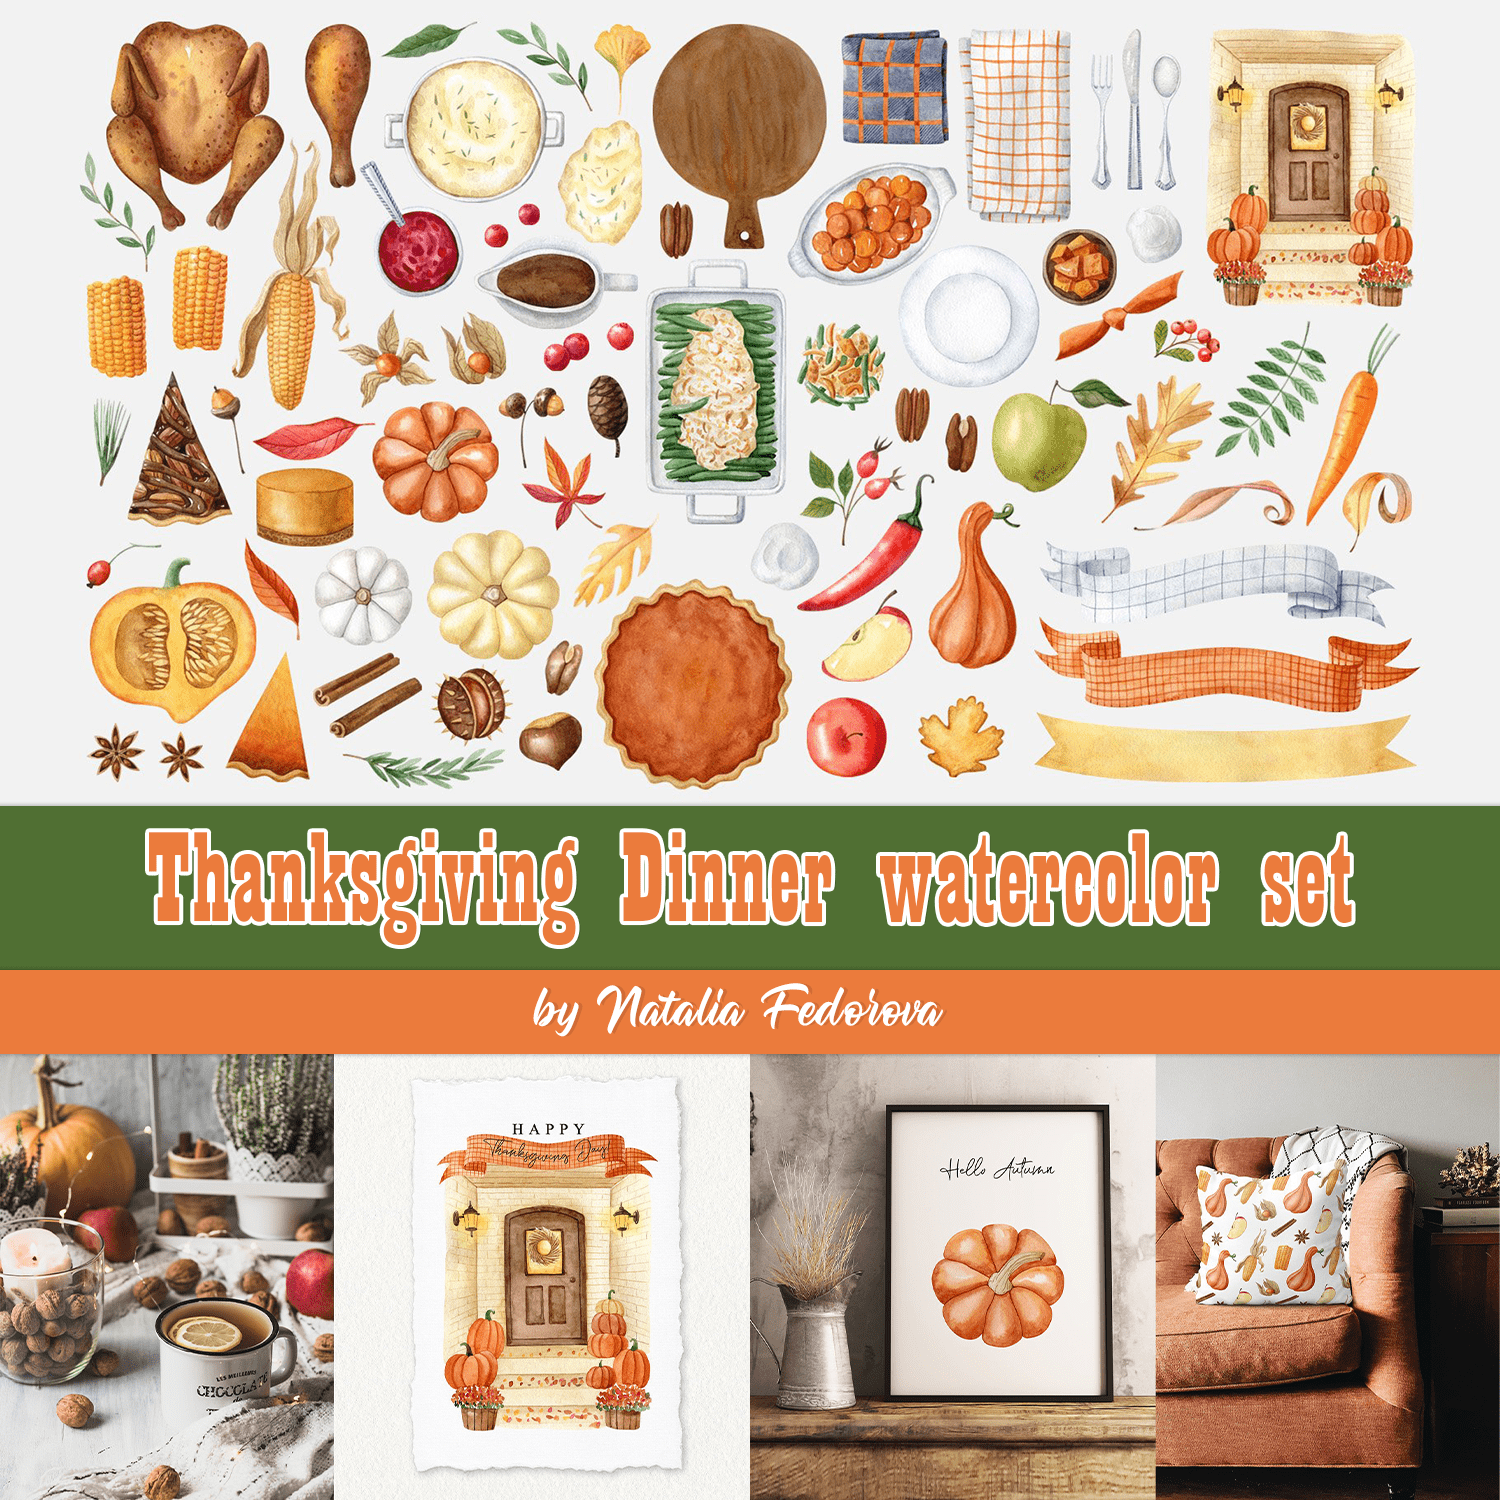 Thanksgiving Dinner watercolor set cover.